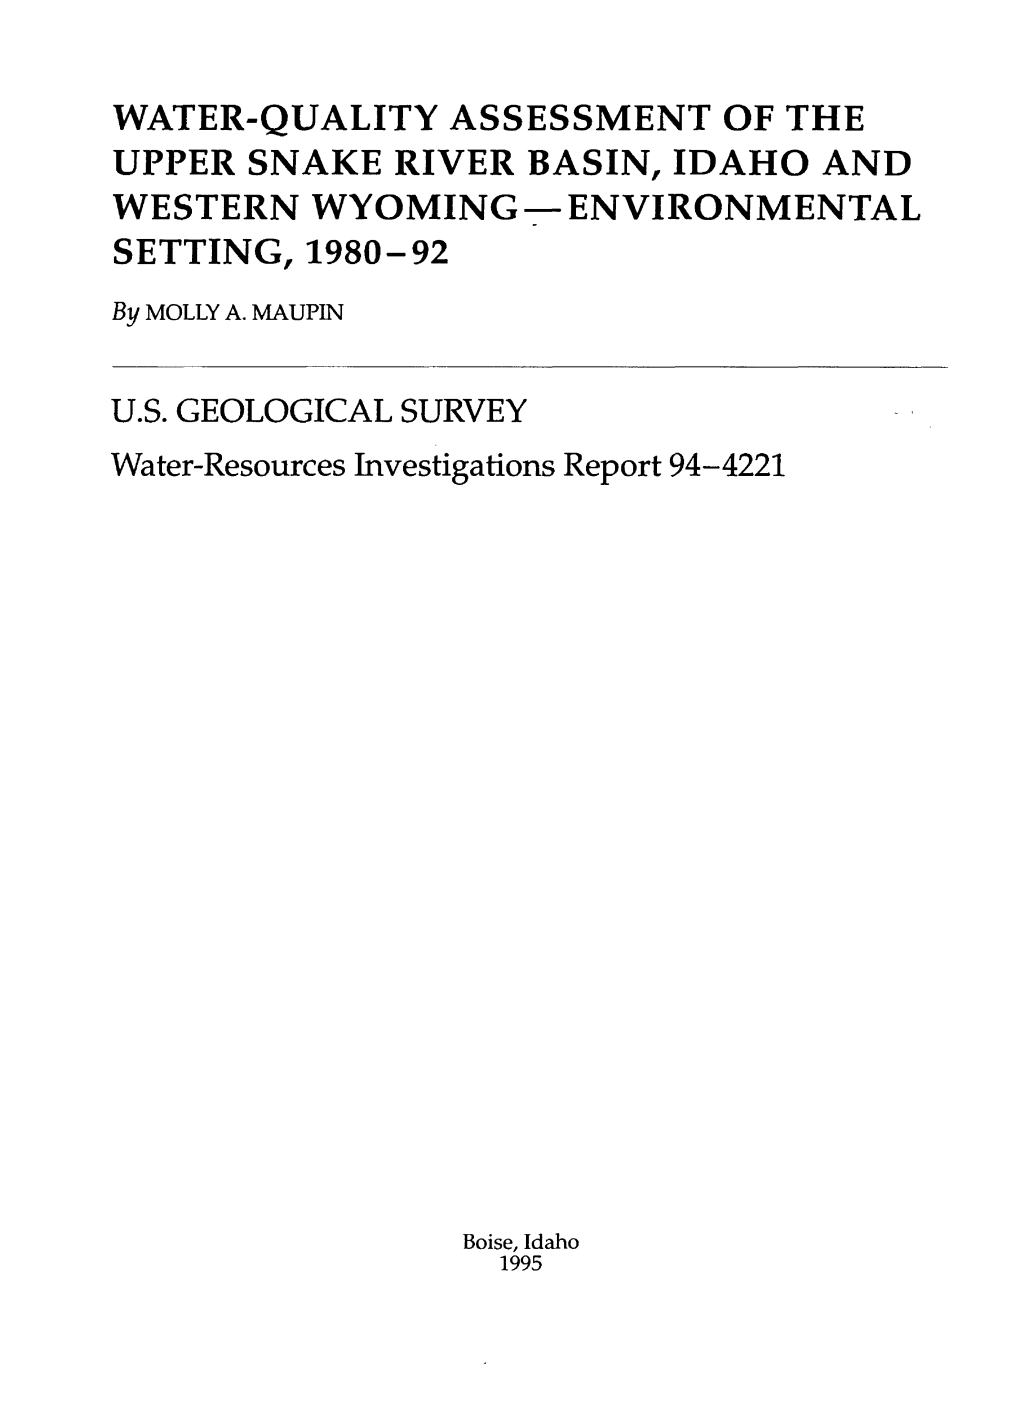 Water-Quality Assessment of the Upper Snake River Basin, Idaho and Western Wyoming Environmental Setting, 1980-92